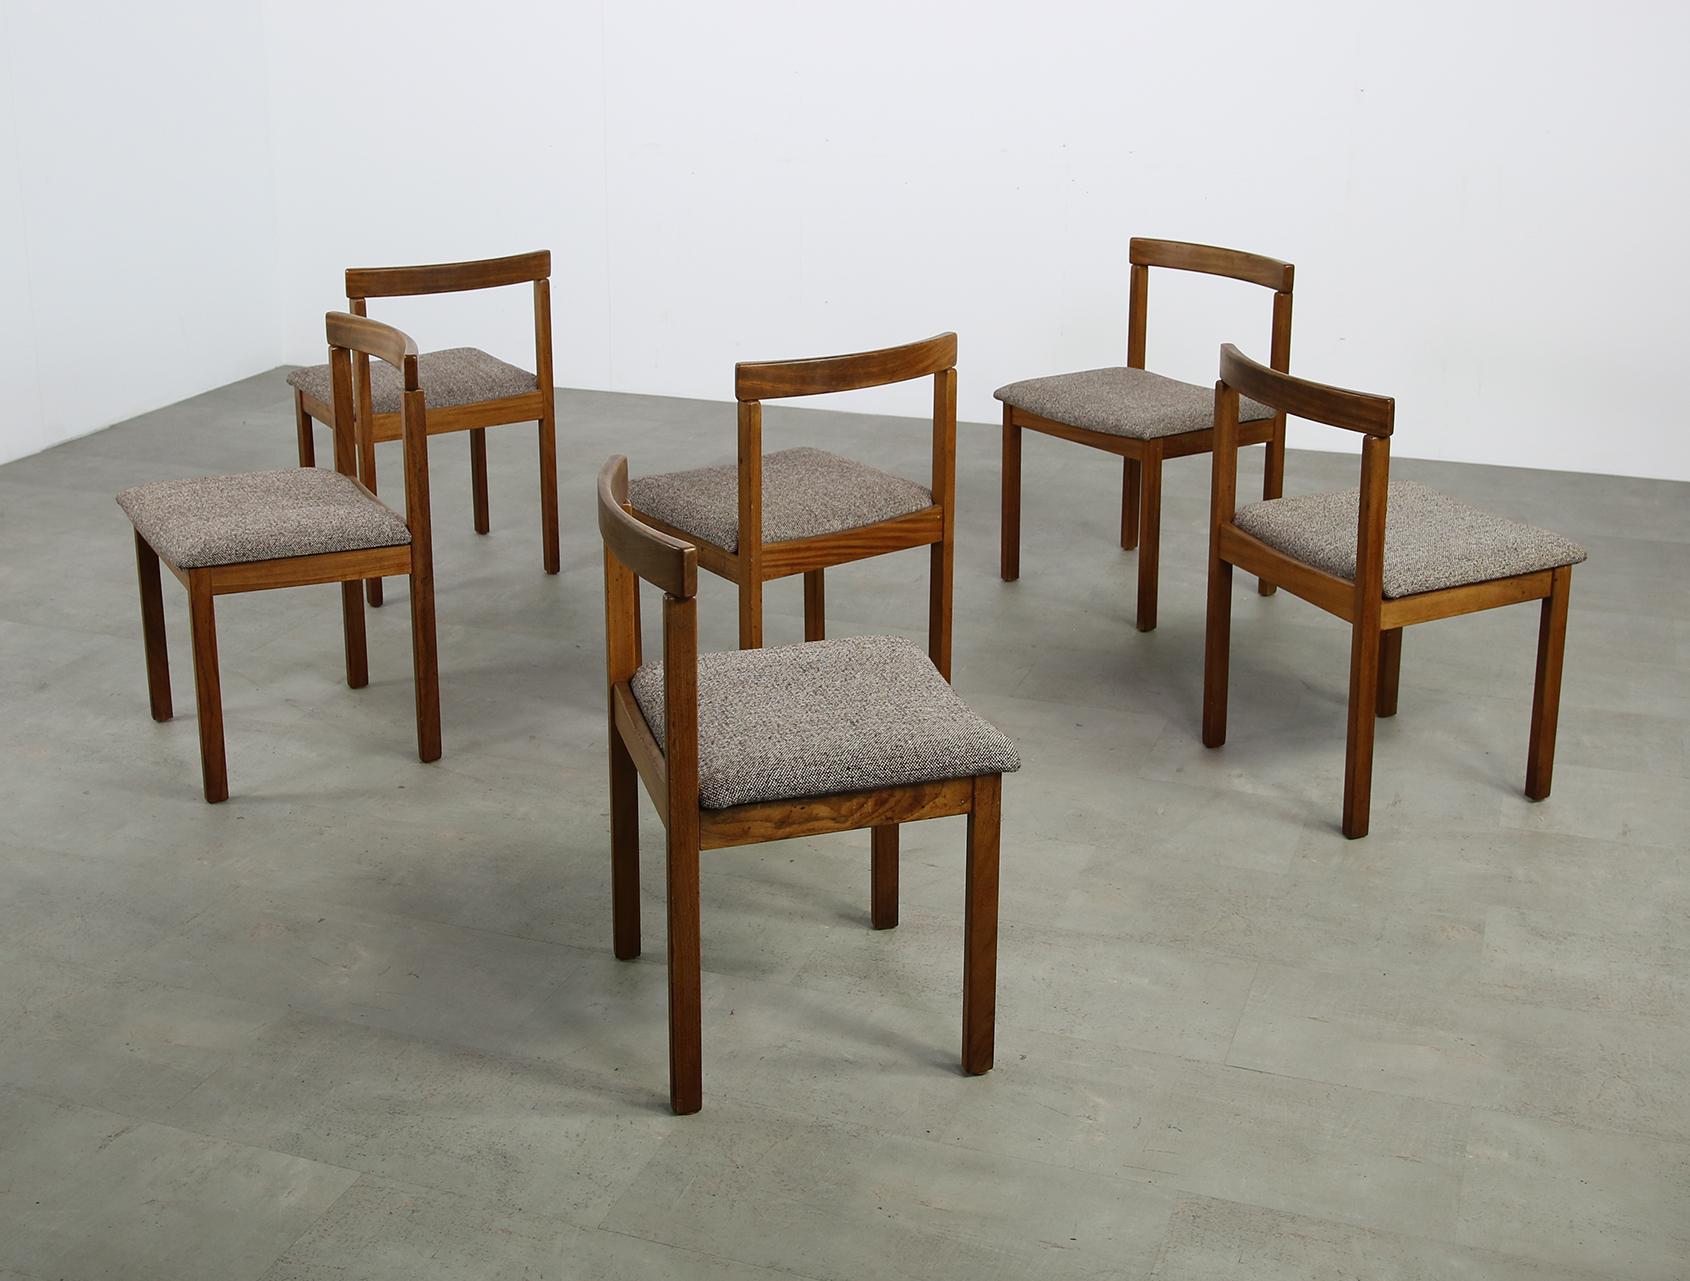 Beautiful and rare set of six Scandinavian Modern chairs, made by Asko, Finland. Very rare, Minimalist design and simple made, reupholstered seats, covered with new tweed fabric.